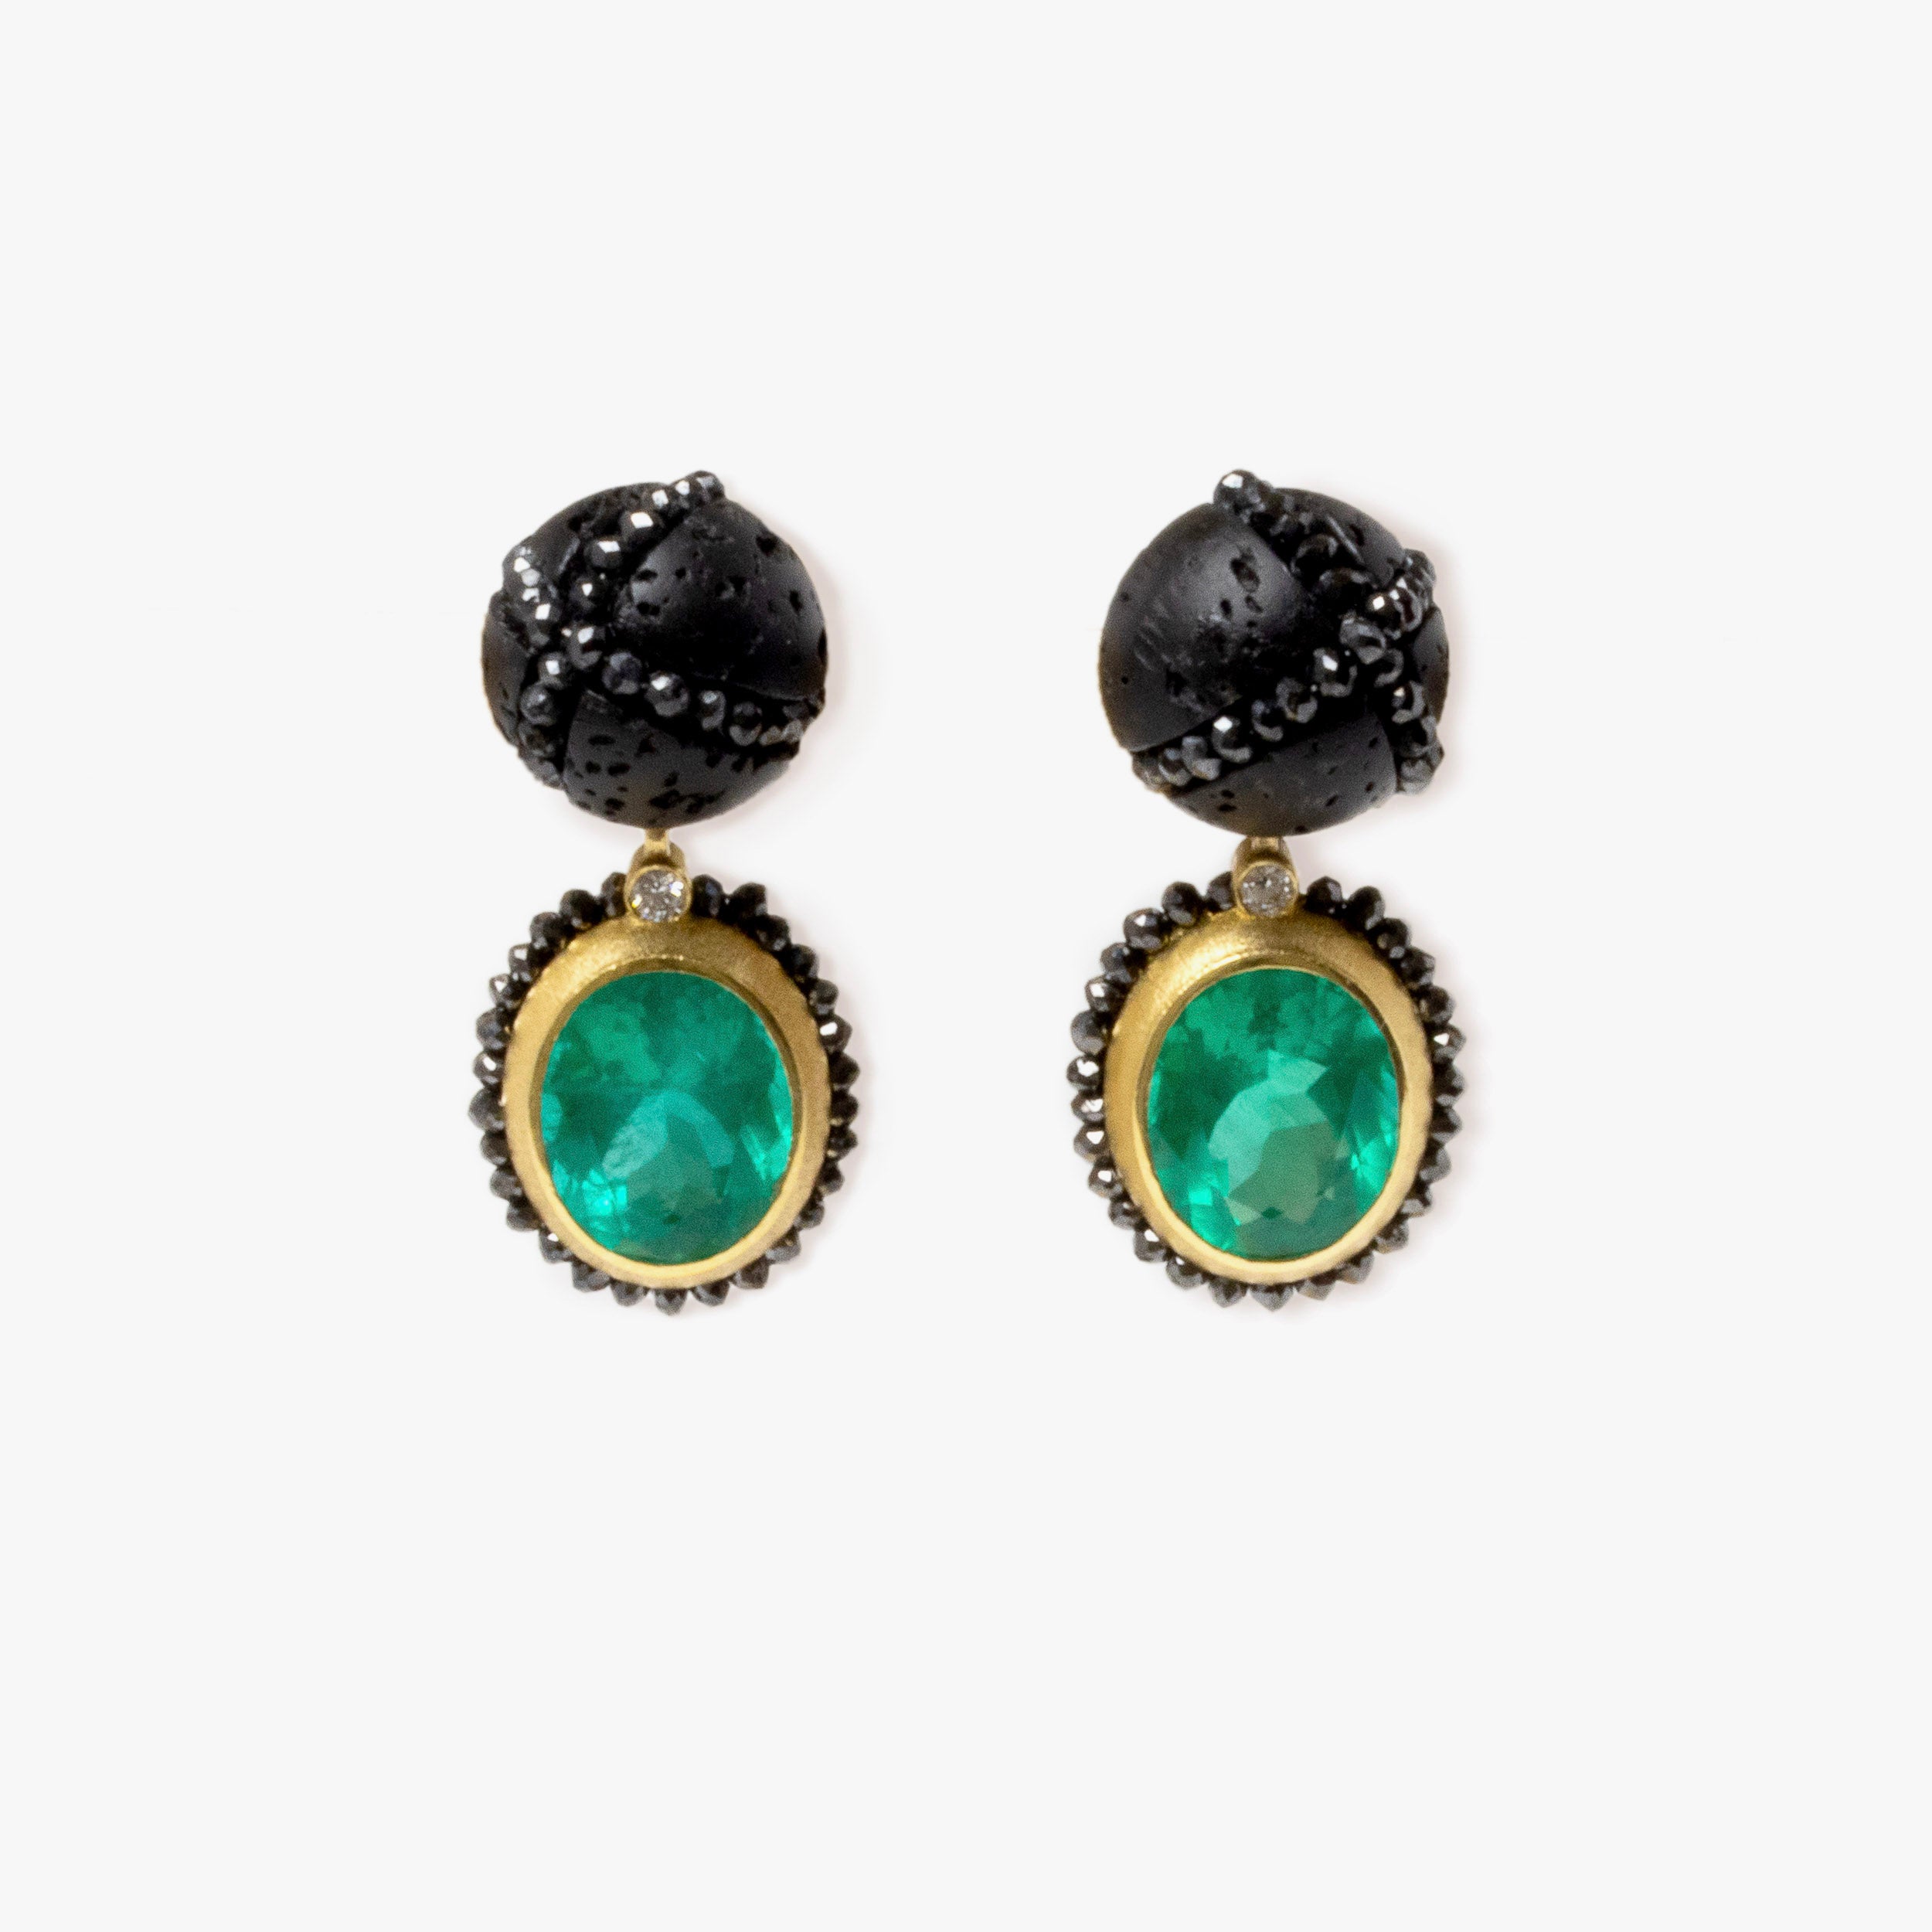 Constellation Earrings with Emeralds